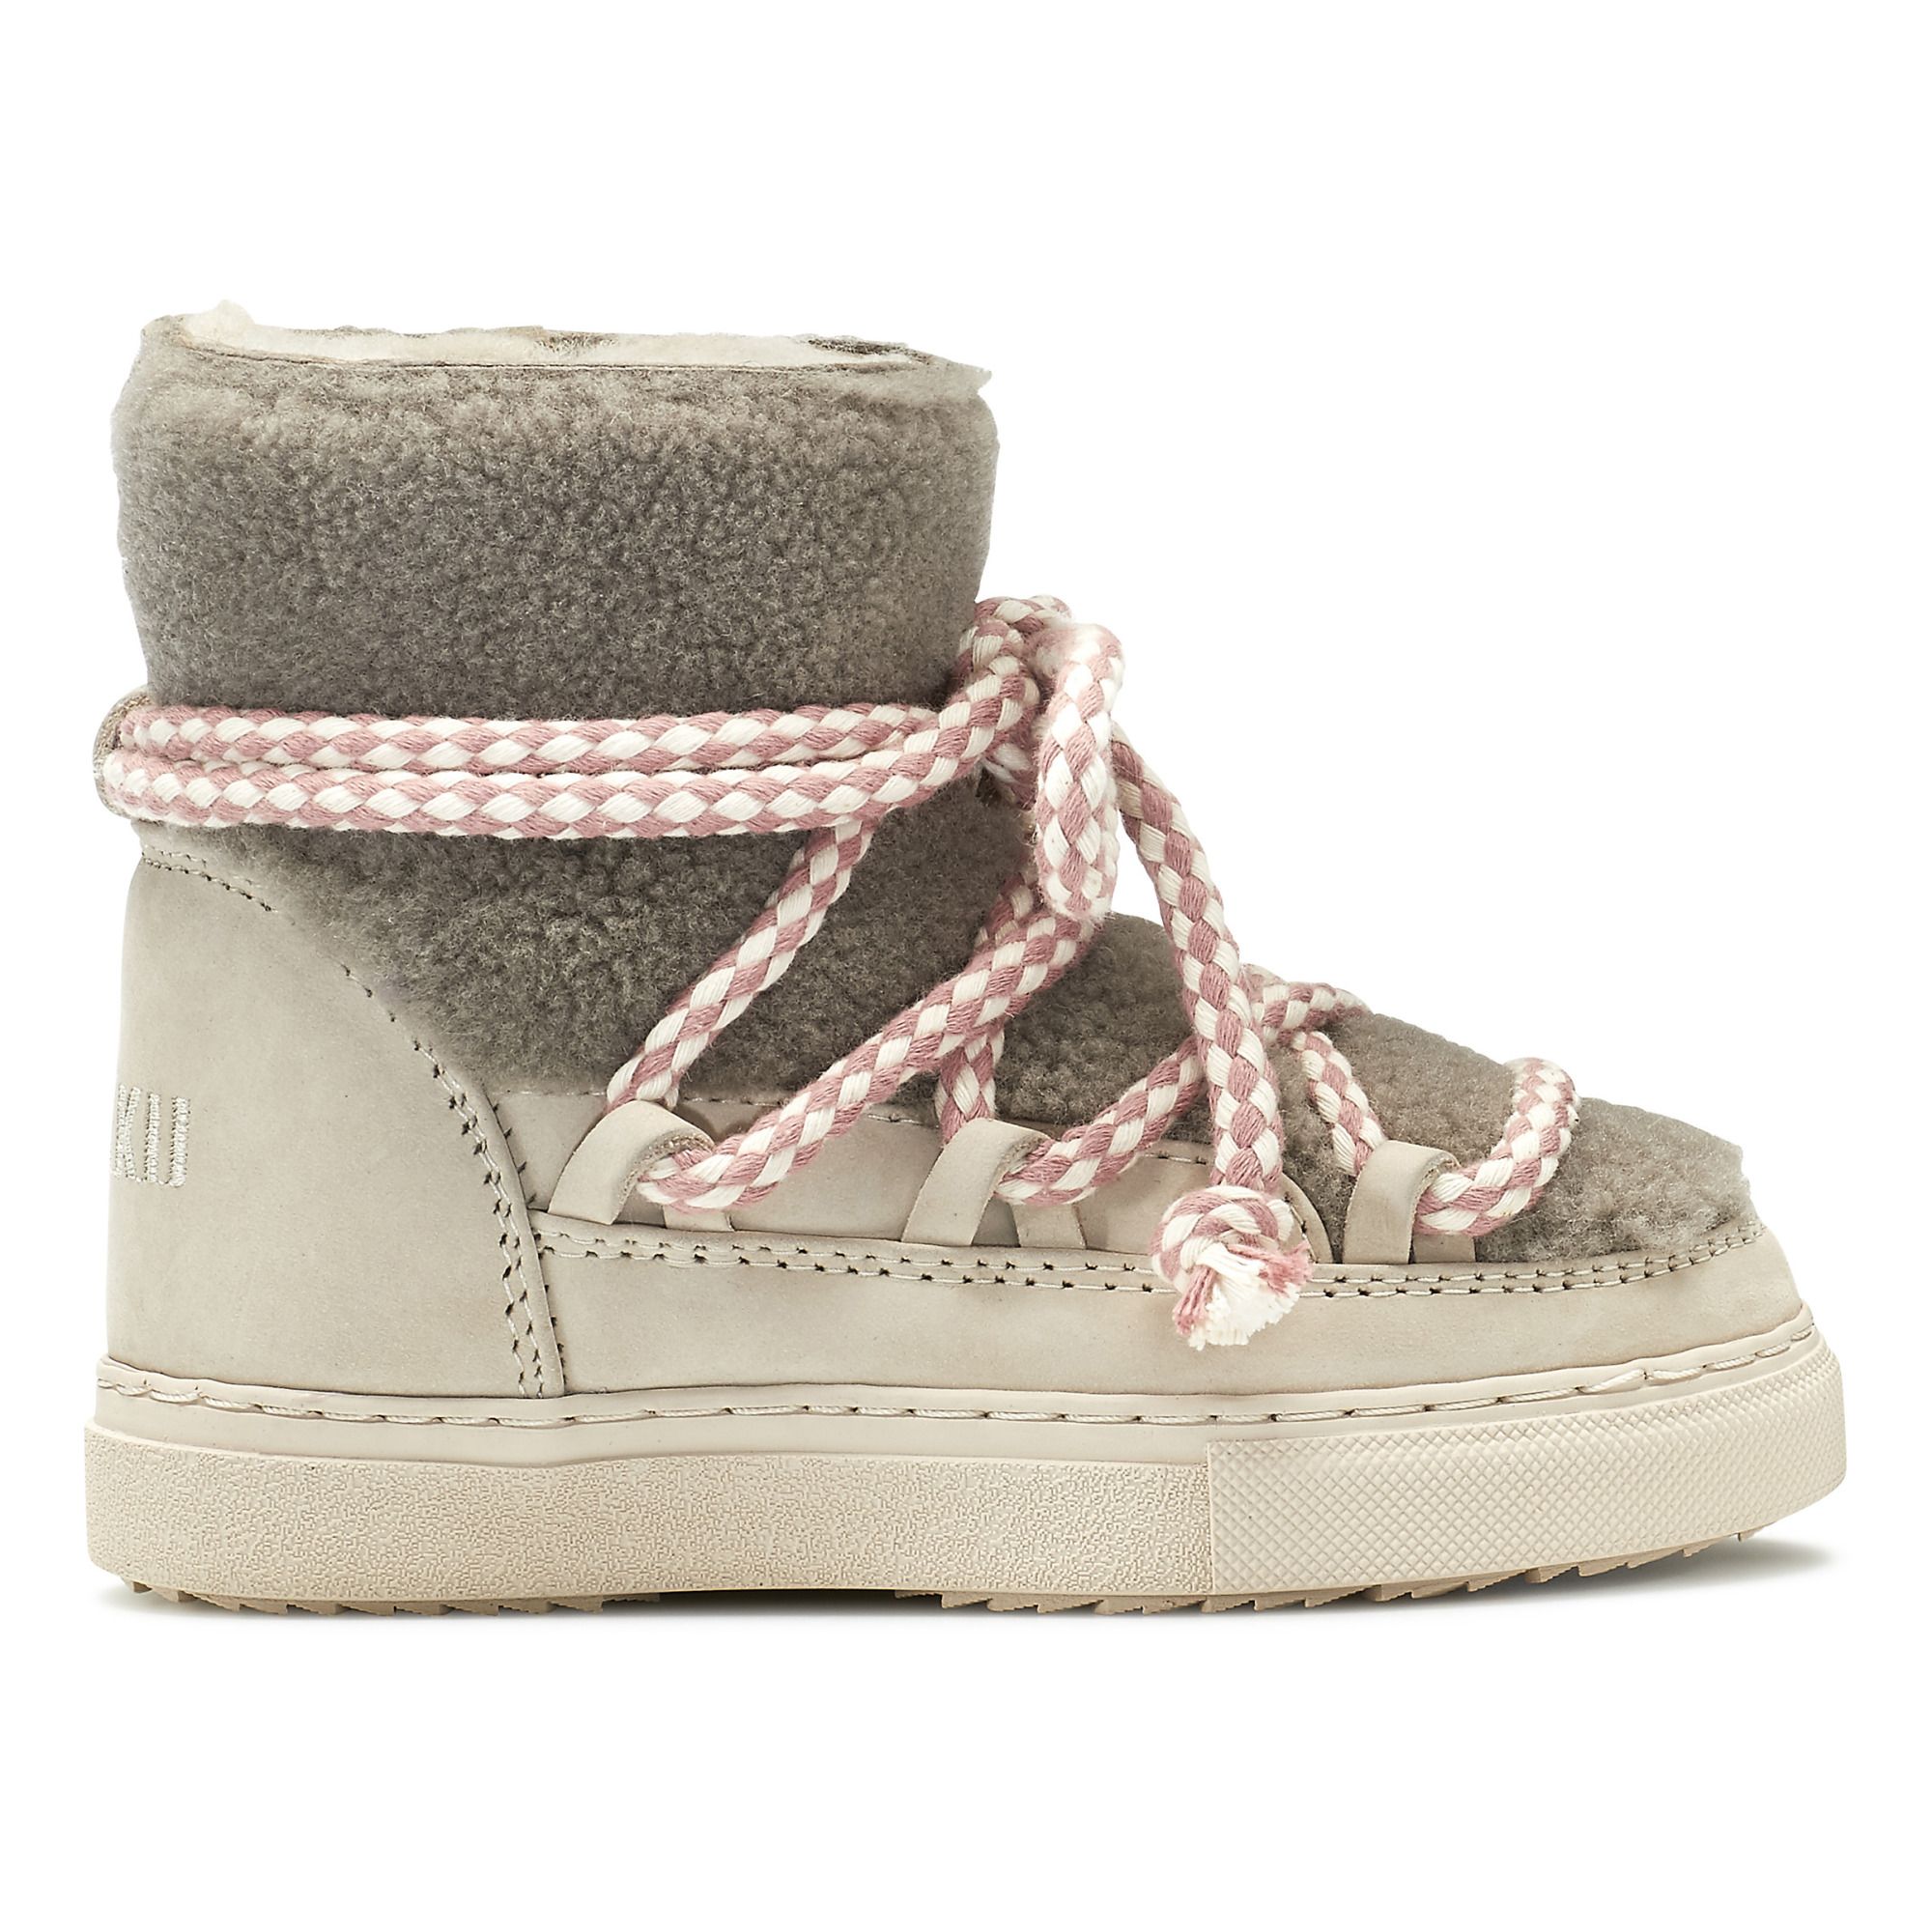 Inuikii - Sneaker Curly - Collection Enfant - - Fille - Taupe